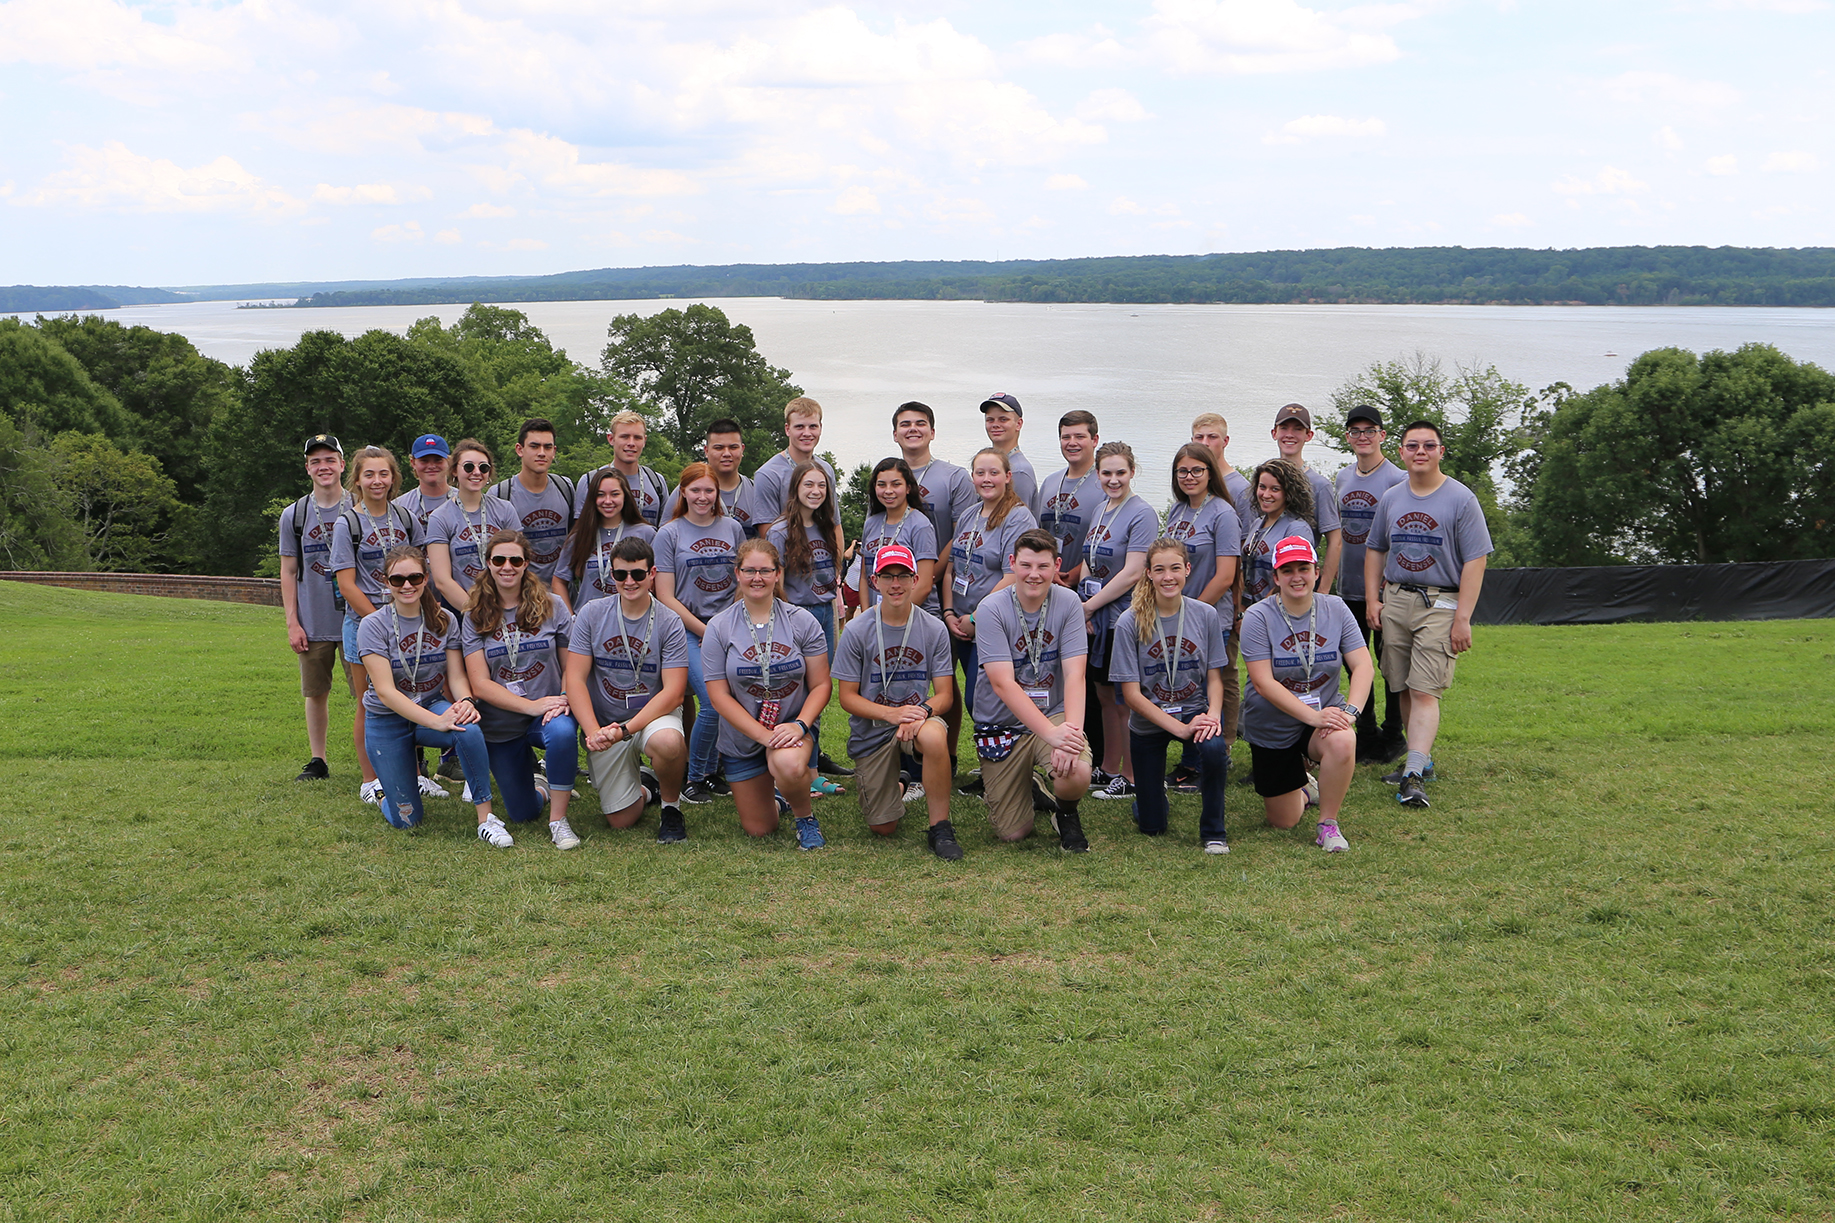 2019 NRA Youth Education Summit: Success and Scholarships